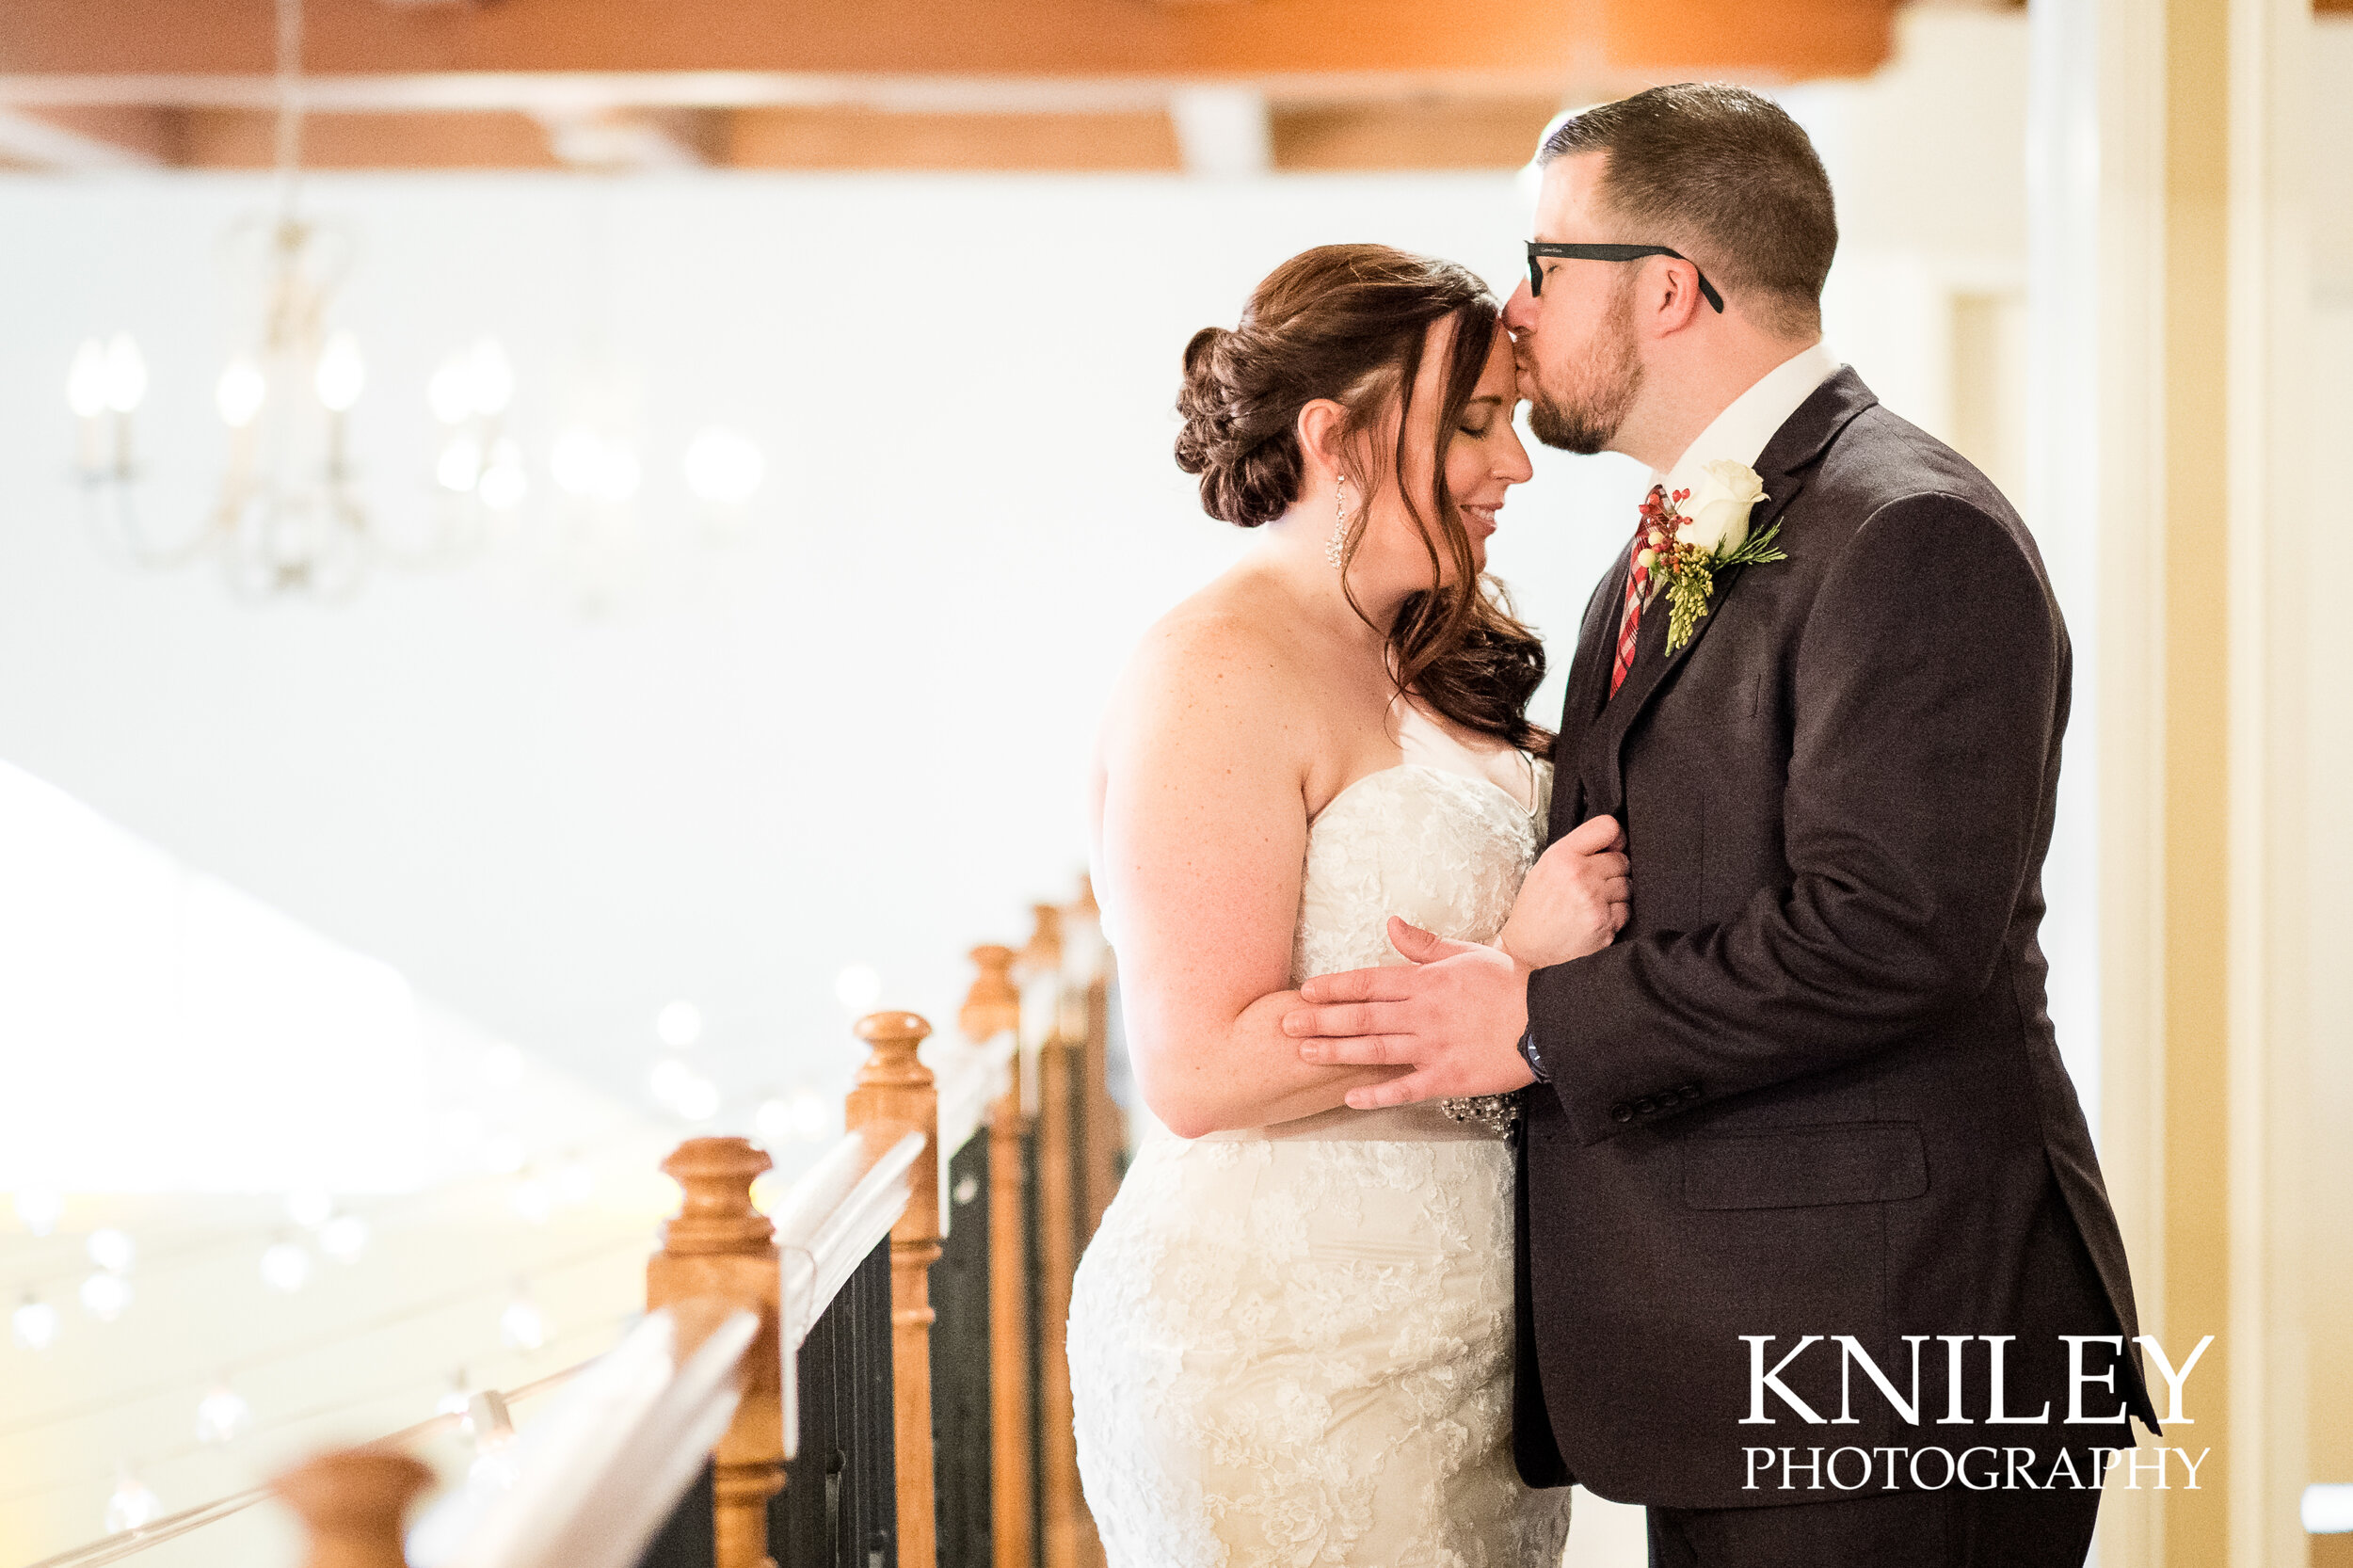 006-Kniley-Photography-Westminster-Chapel-Wedding-Venue-Picture-8789.jpg